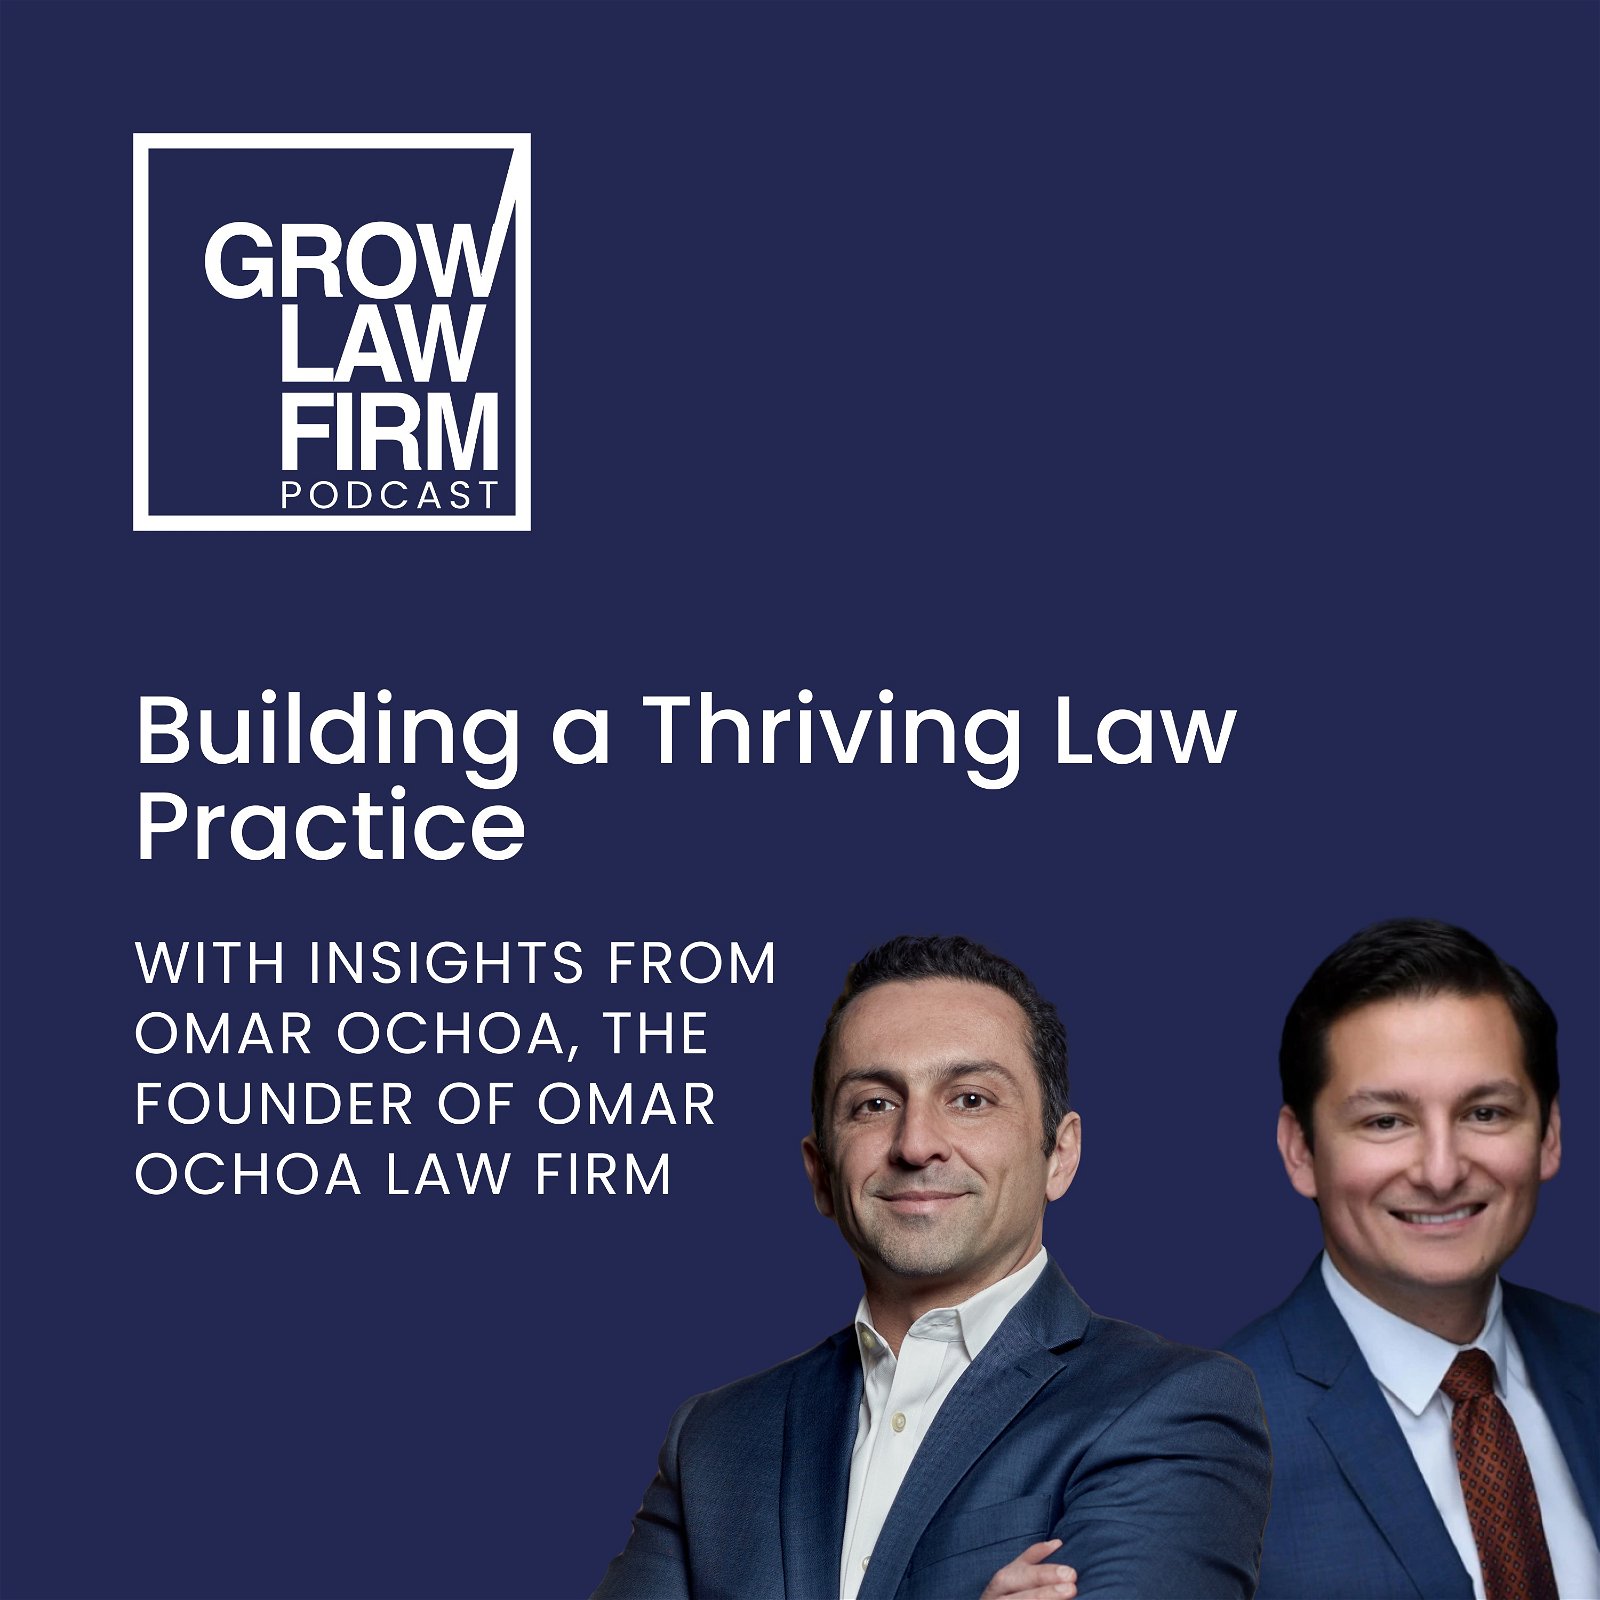 Building a Thriving Law Practice with Insights from Omar Ochoa, the Founder of Omar Ochoa Law Firm